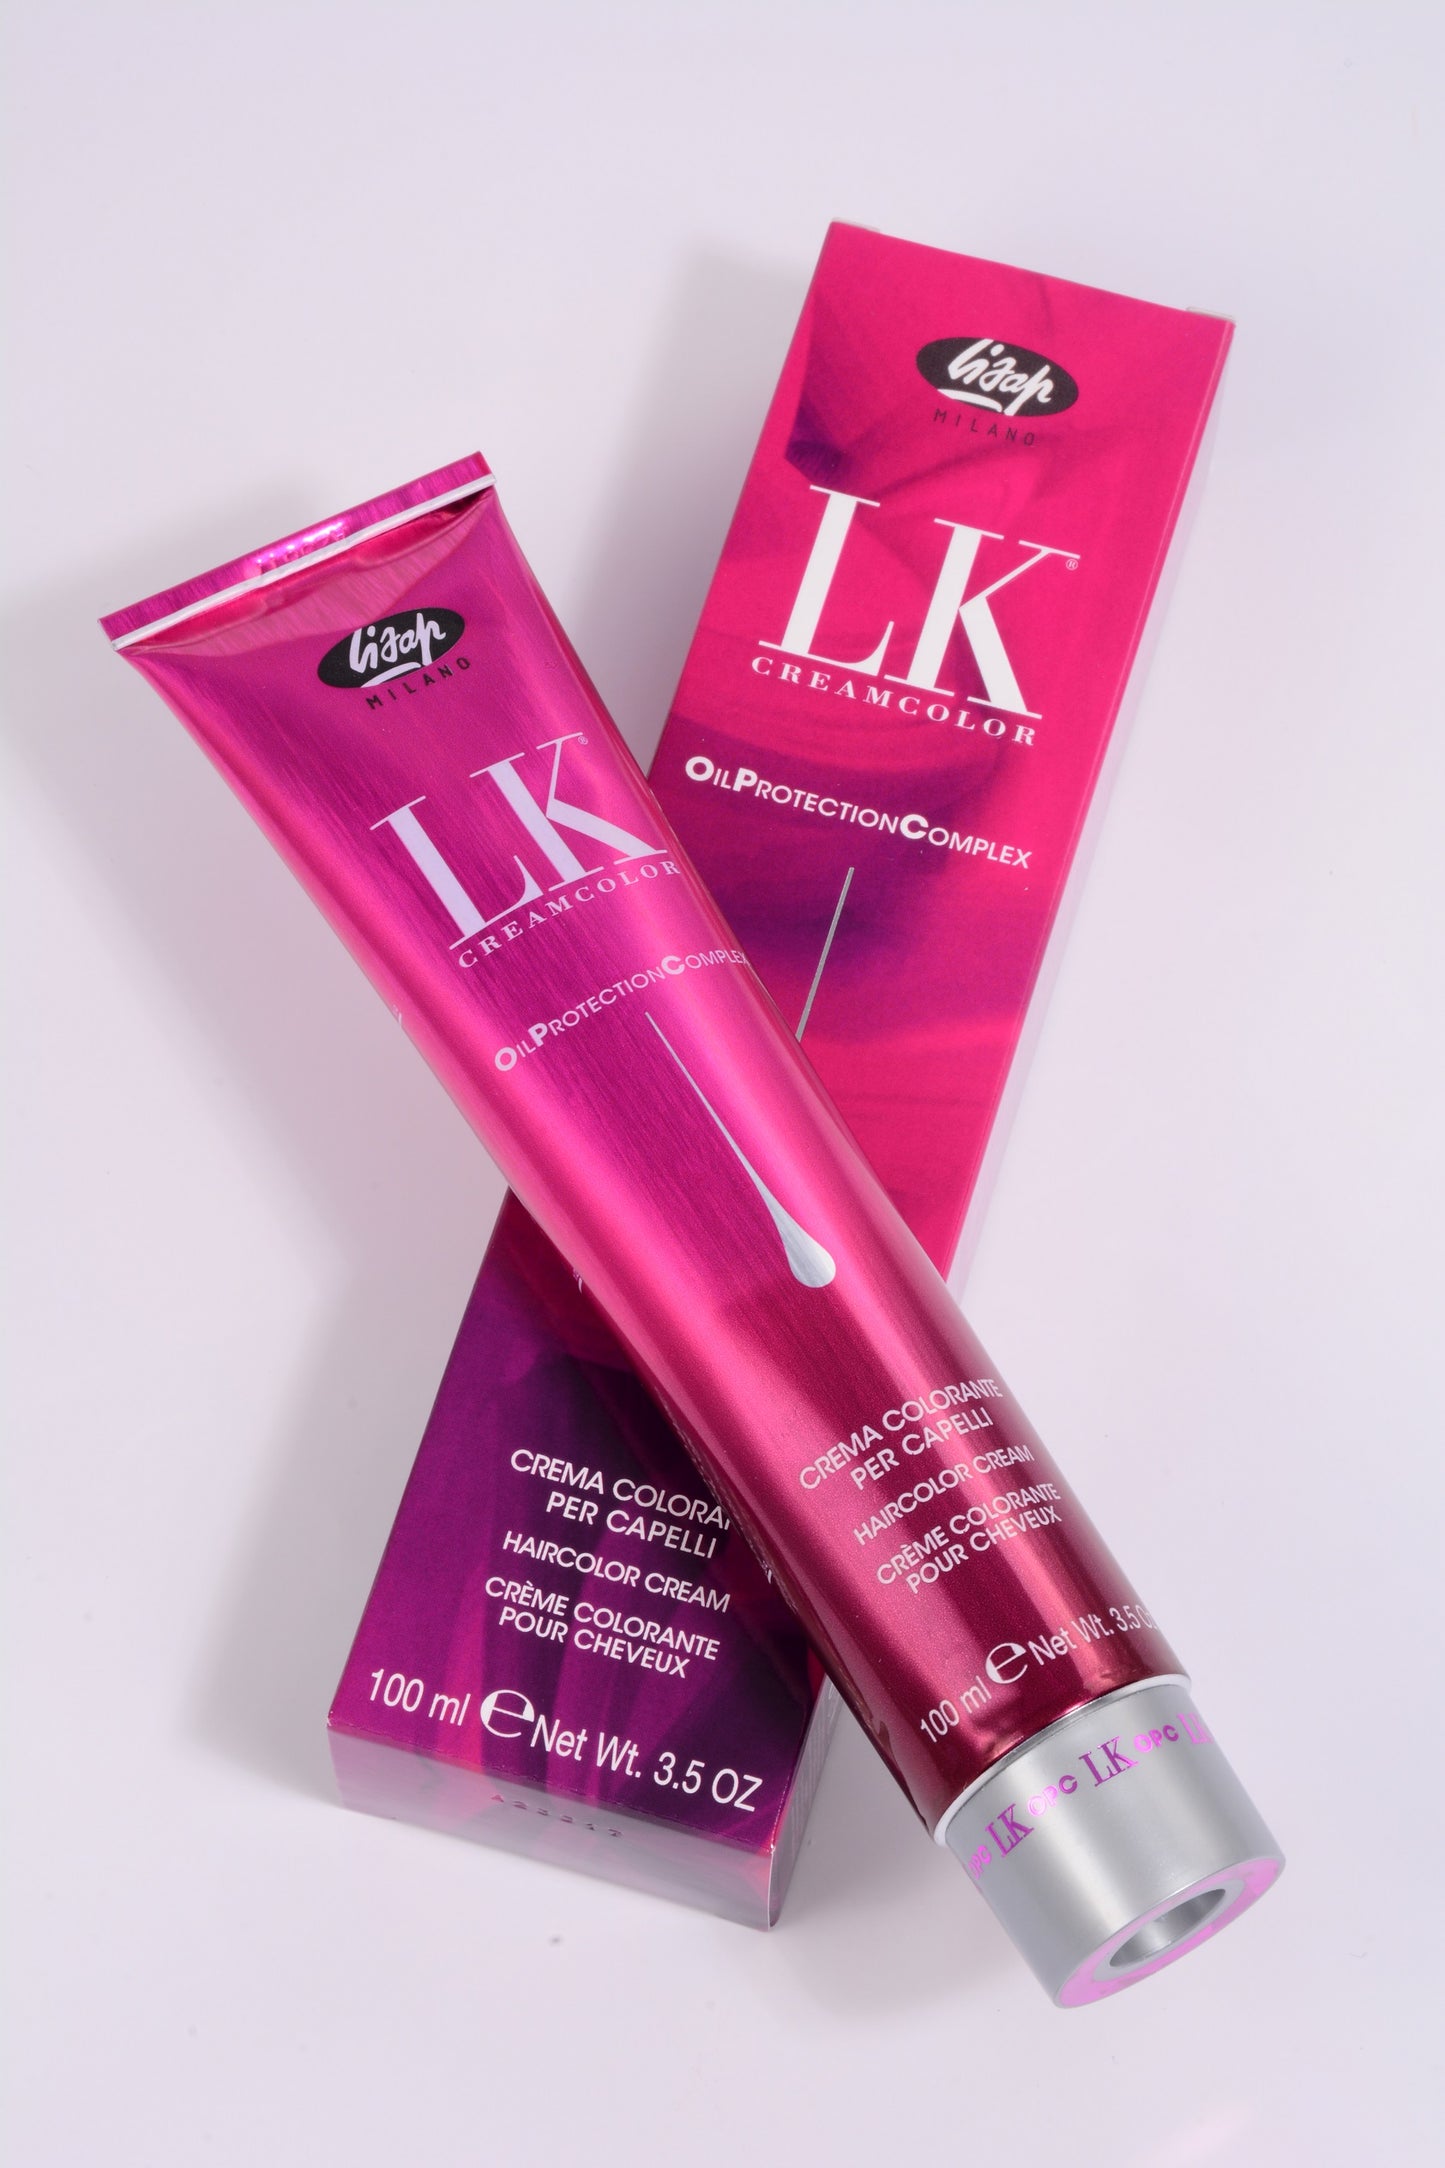 LK Creamcolor 8/3 Oil Protection Complex